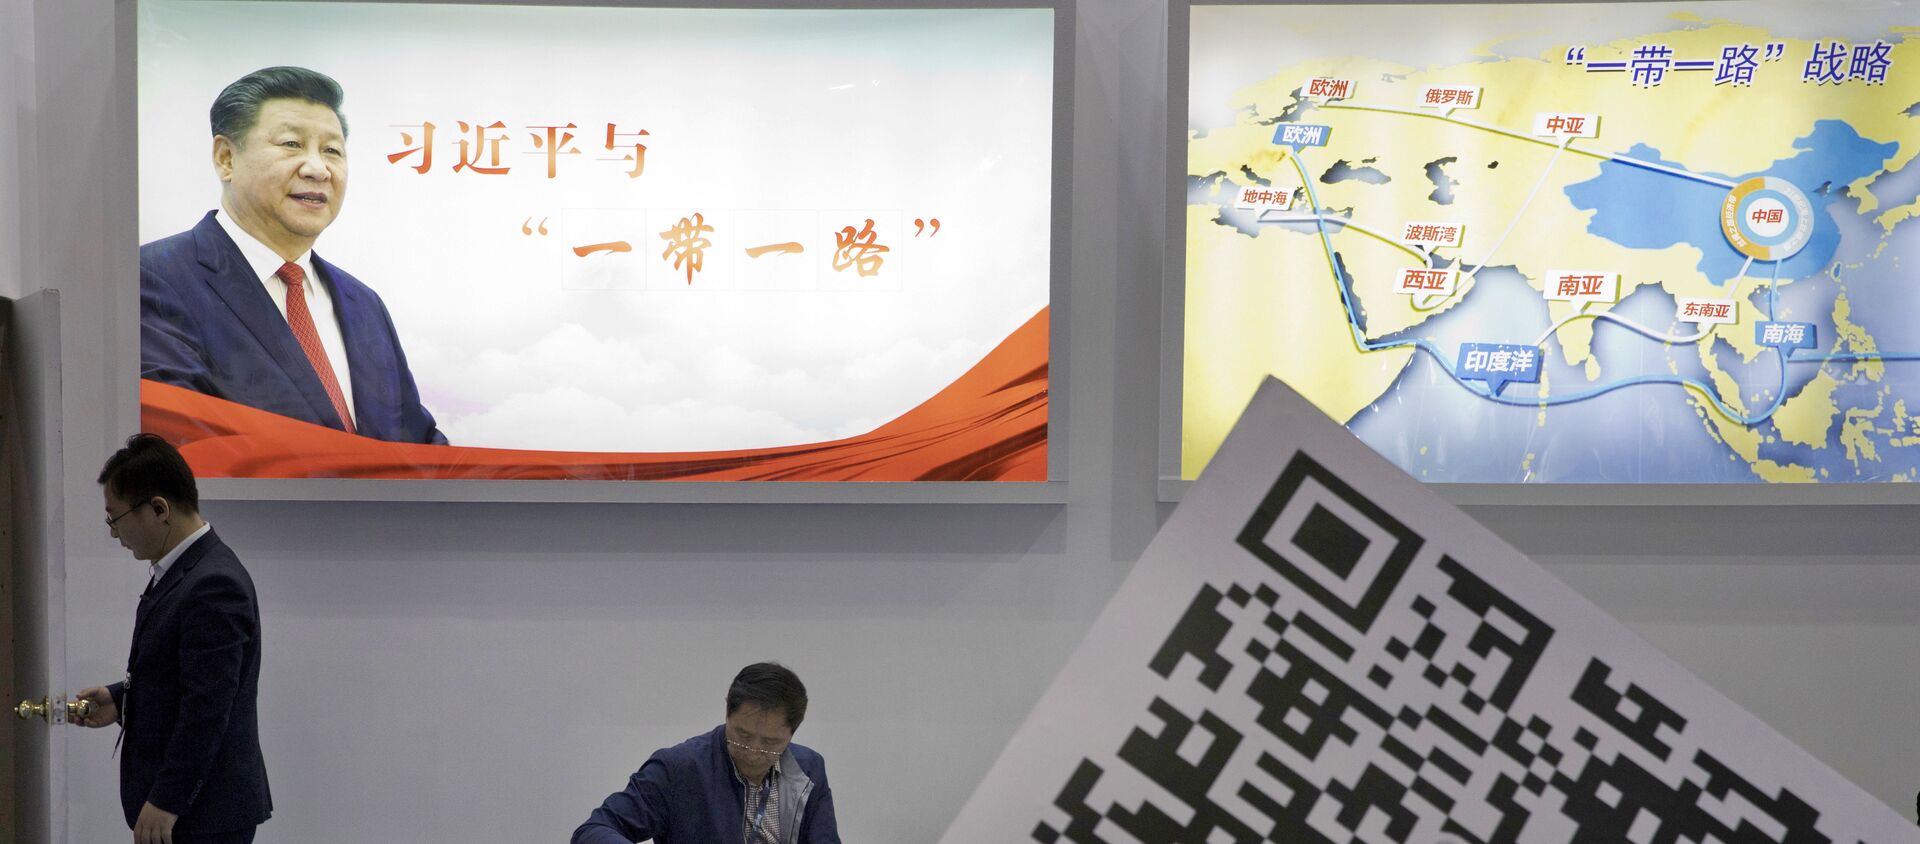 Visitors at a technology conference wait near illuminated boards highlighting Chinese President Xi Jinping's signature One Belt, One Road foreign policy plan in Beijing, China, Friday, April 28, 2017 - Sputnik International, 1920, 29.01.2021